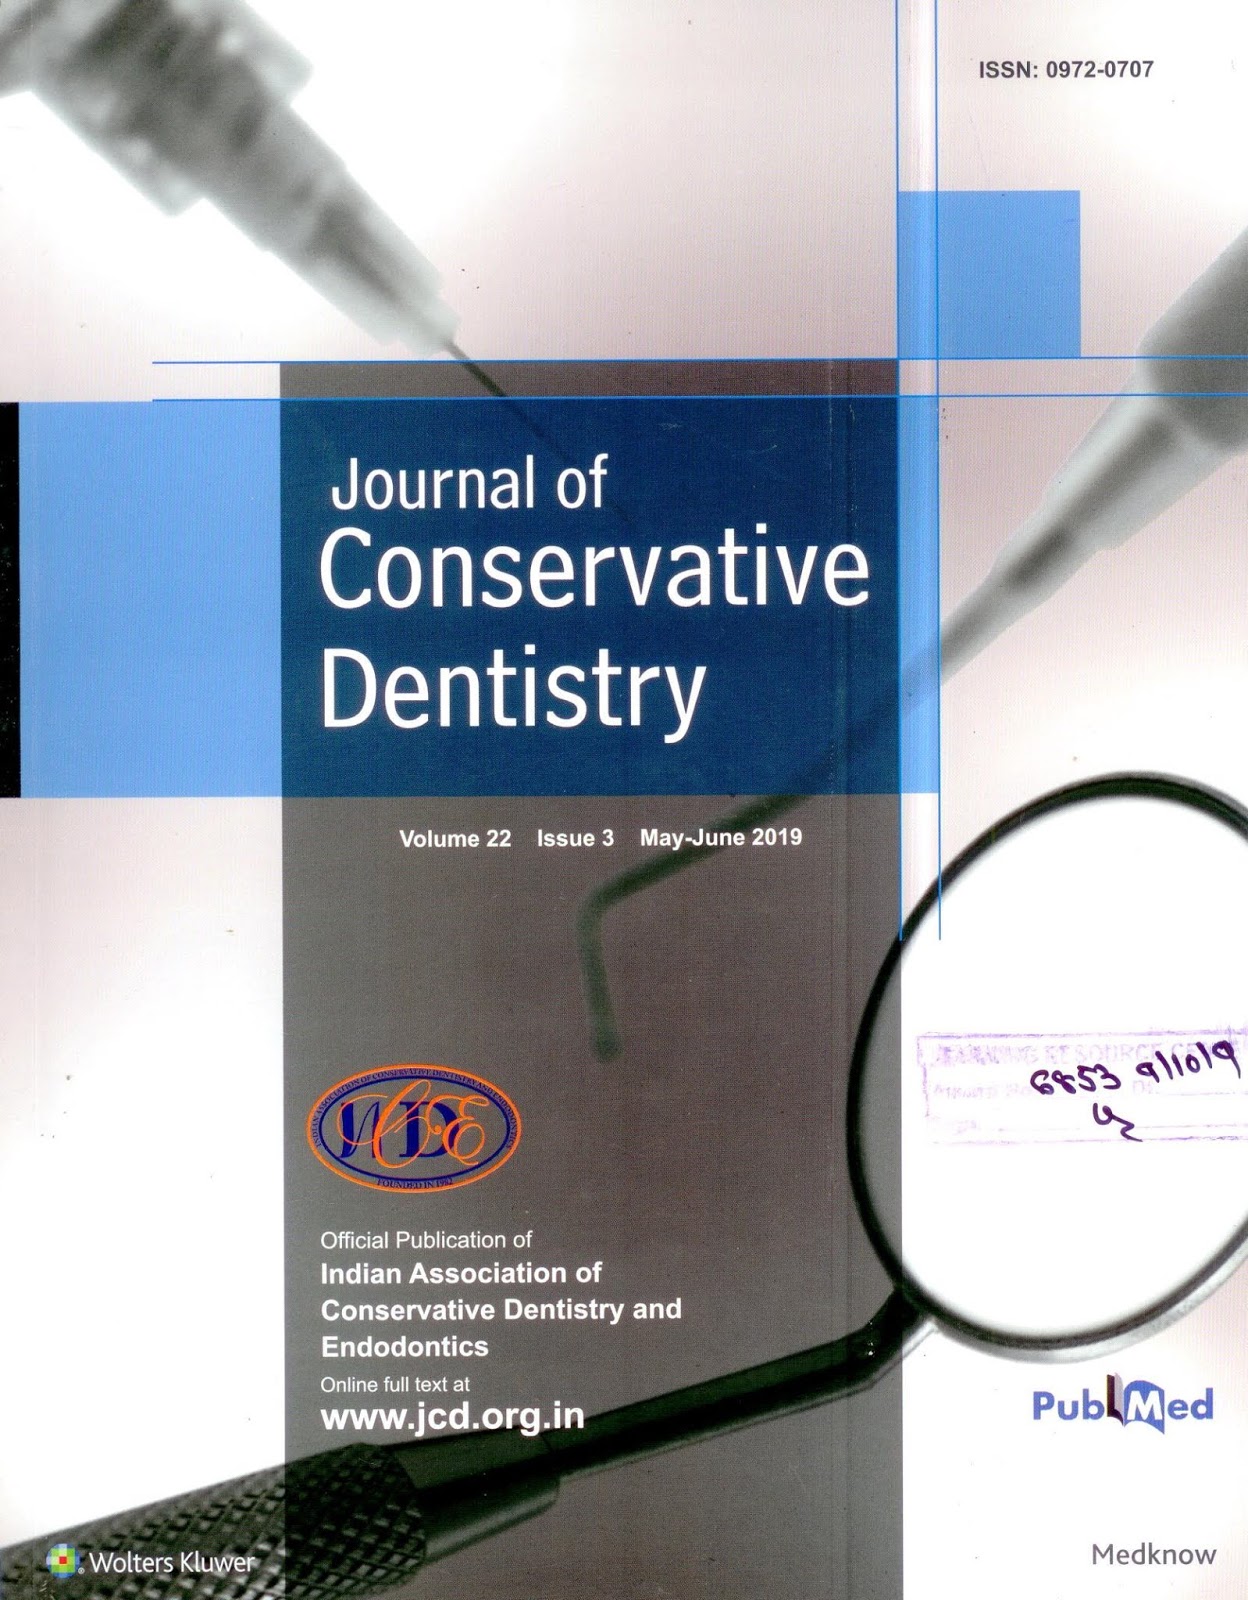 http://www.jcd.org.in/showBackIssue.asp?issn=0972-0707;year=2019;volume=22;issue=3;month=May-June